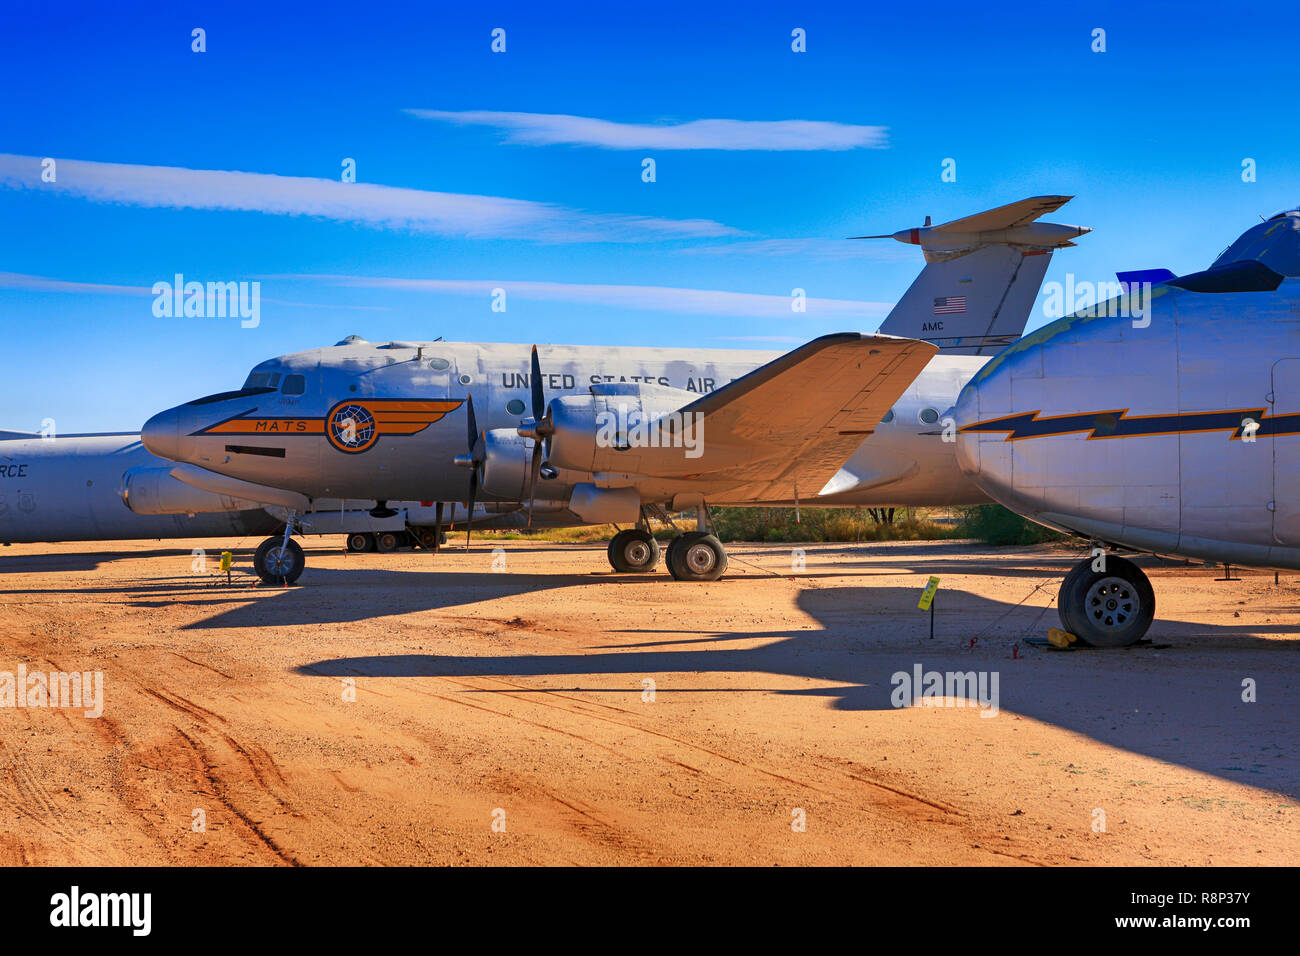 1949 Douglas DC-54D Transport Plane on display at the Pima Air & Space Museum in Tucson, AZ Stock Photo